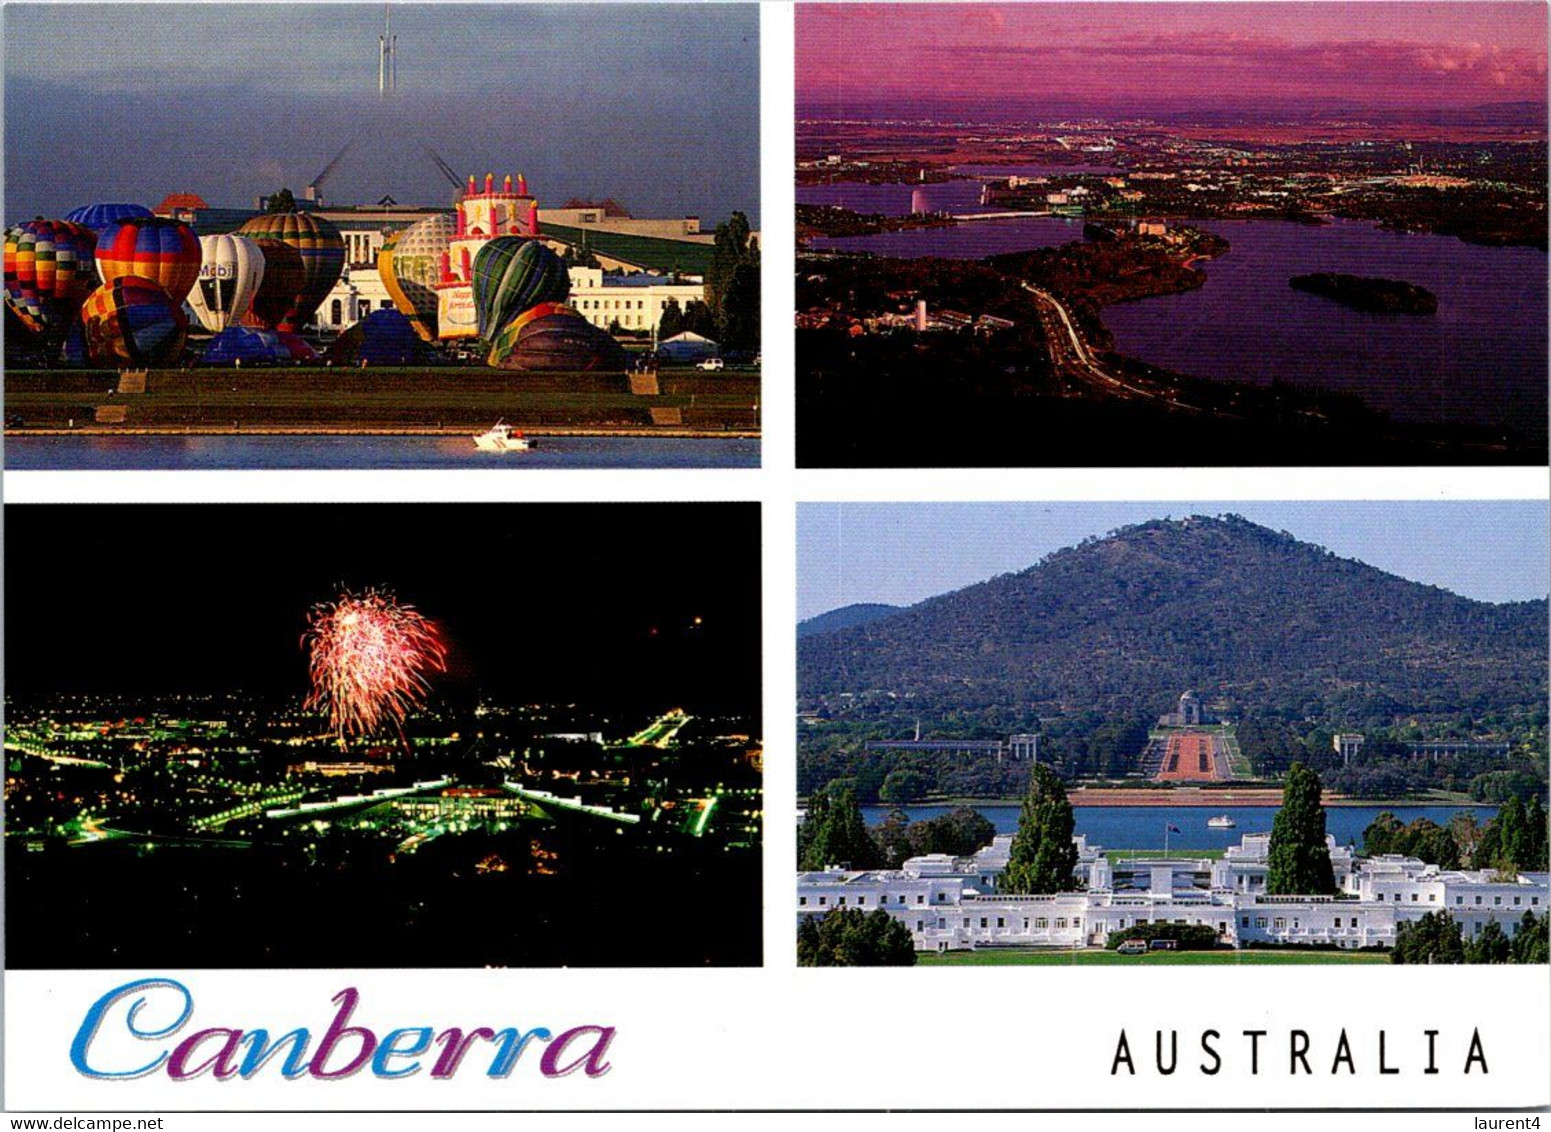 (4 M 50) Australia  - ACT - City Of Canberra (4 Views) - Canberra (ACT)